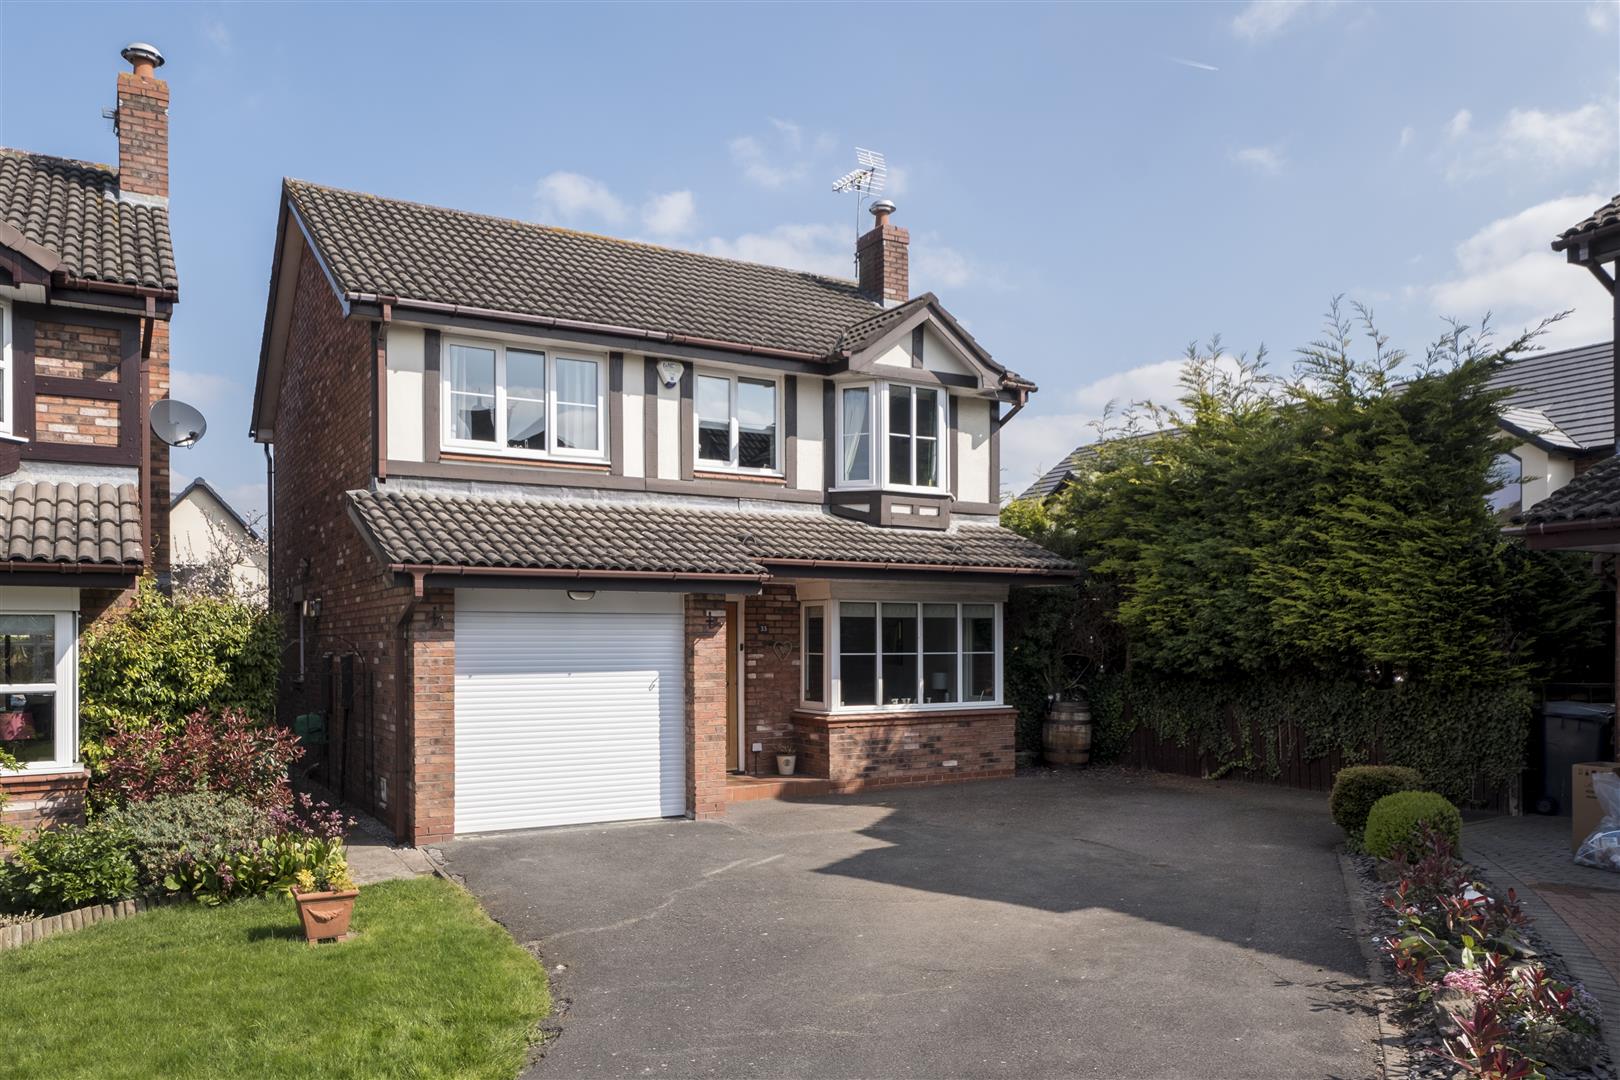 4 bedroom  Detached House for Sale in Middlewich